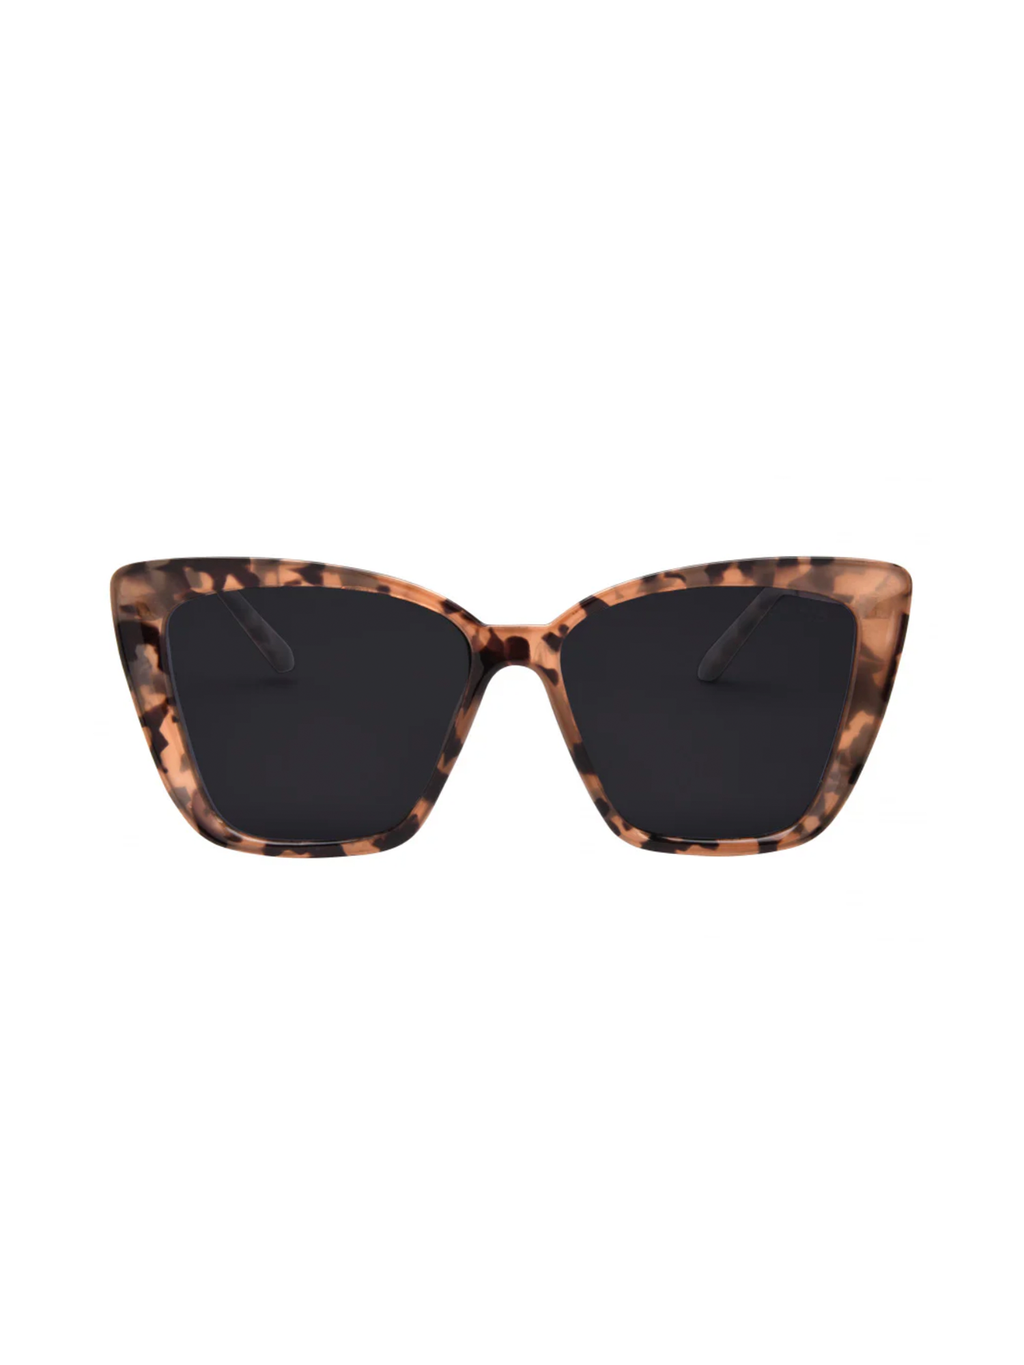 Aloha Fox Sunnies in Blonde Tort/Smoke - Stitch And Feather